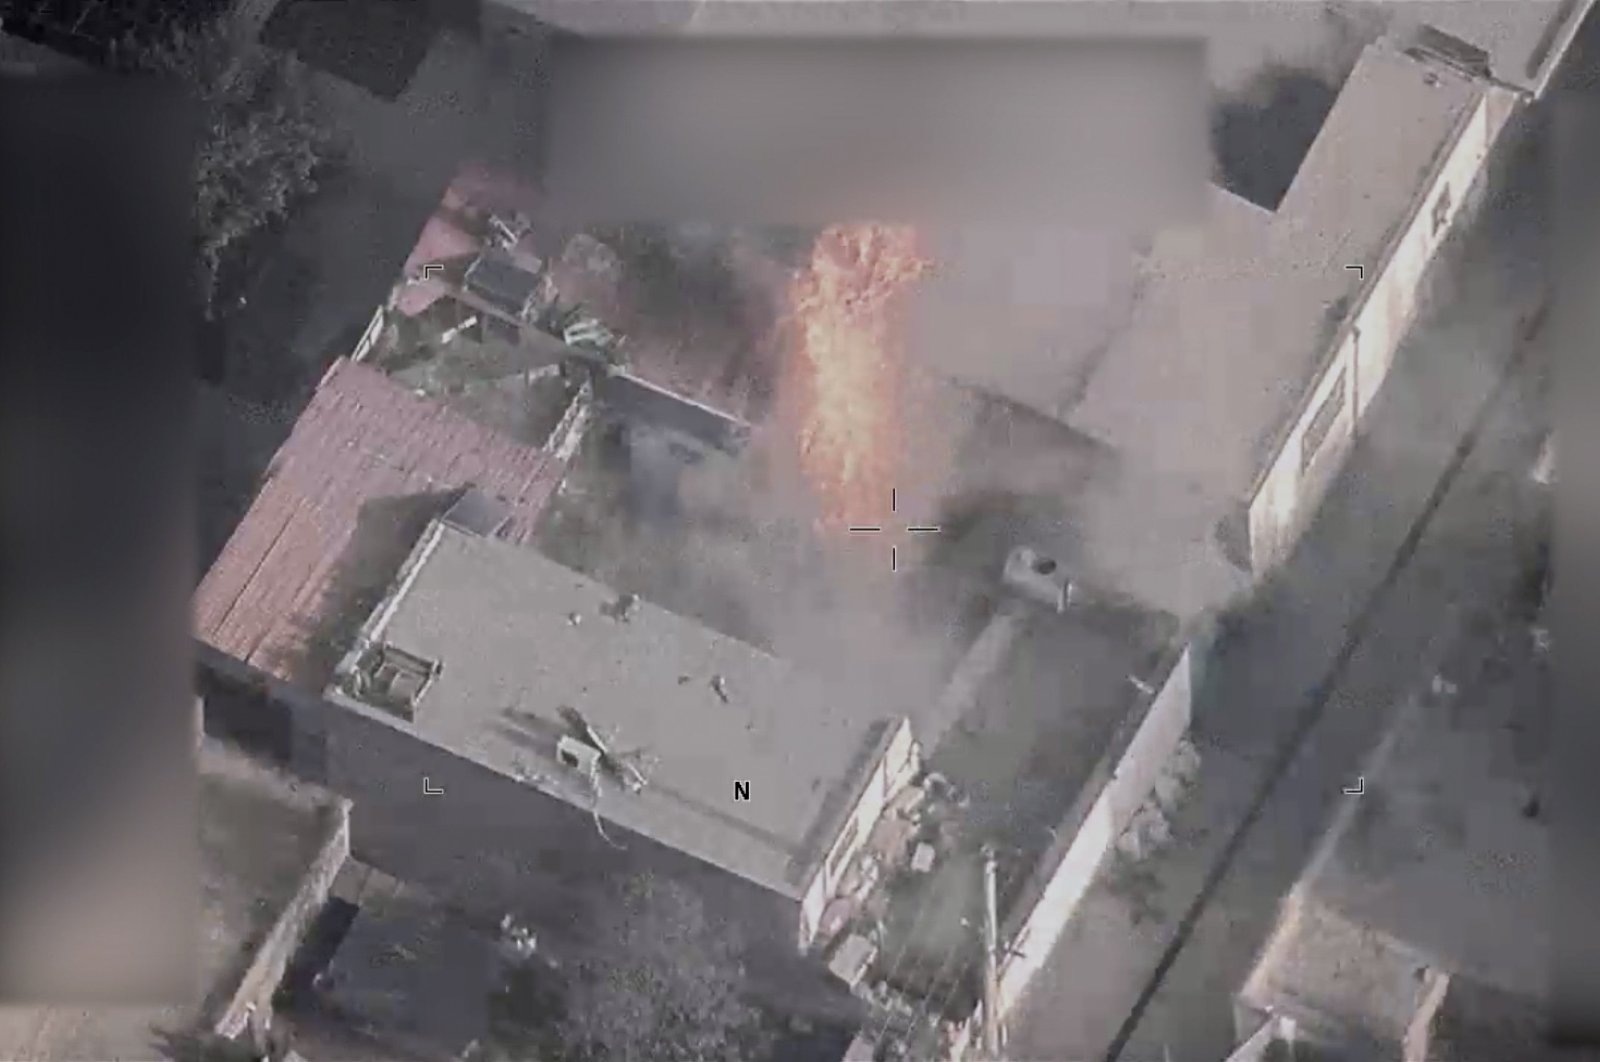 This image from a video released by the U.S. Department of Defense shows a fire in the aftermath of a drone strike in Kabul, Afghanistan, Aug. 29, 2021. (AP Photo)